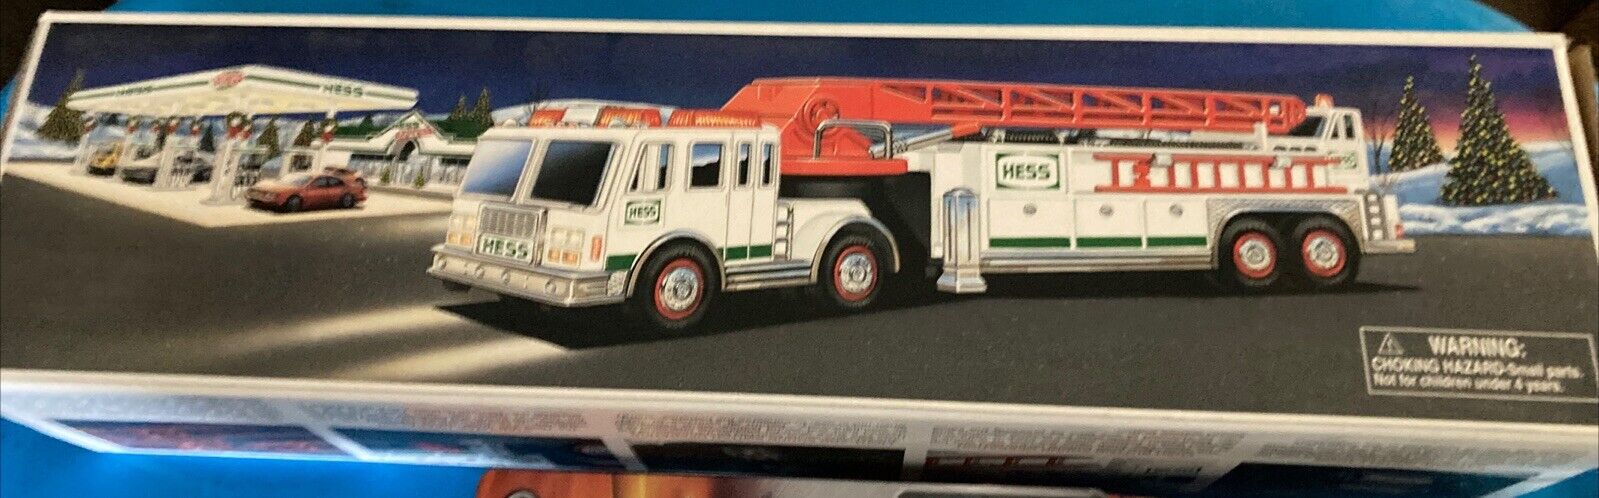 2000 Hess Toy Fire Truck - New in Box